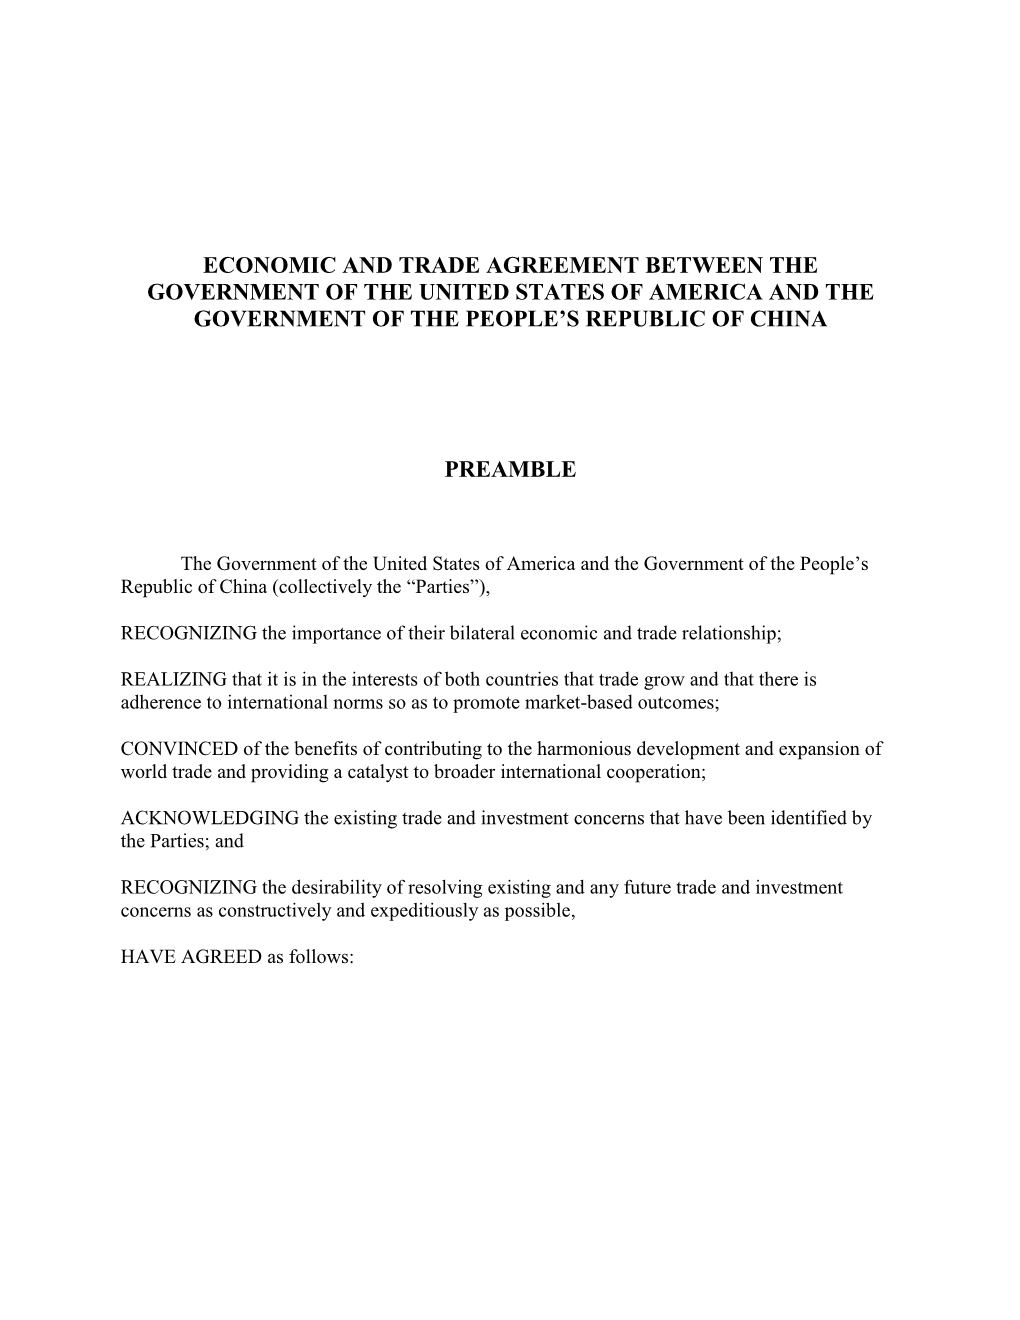 Economic and Trade Agreement Between the Government of the United States of America and the Government of the People’S Republic of China